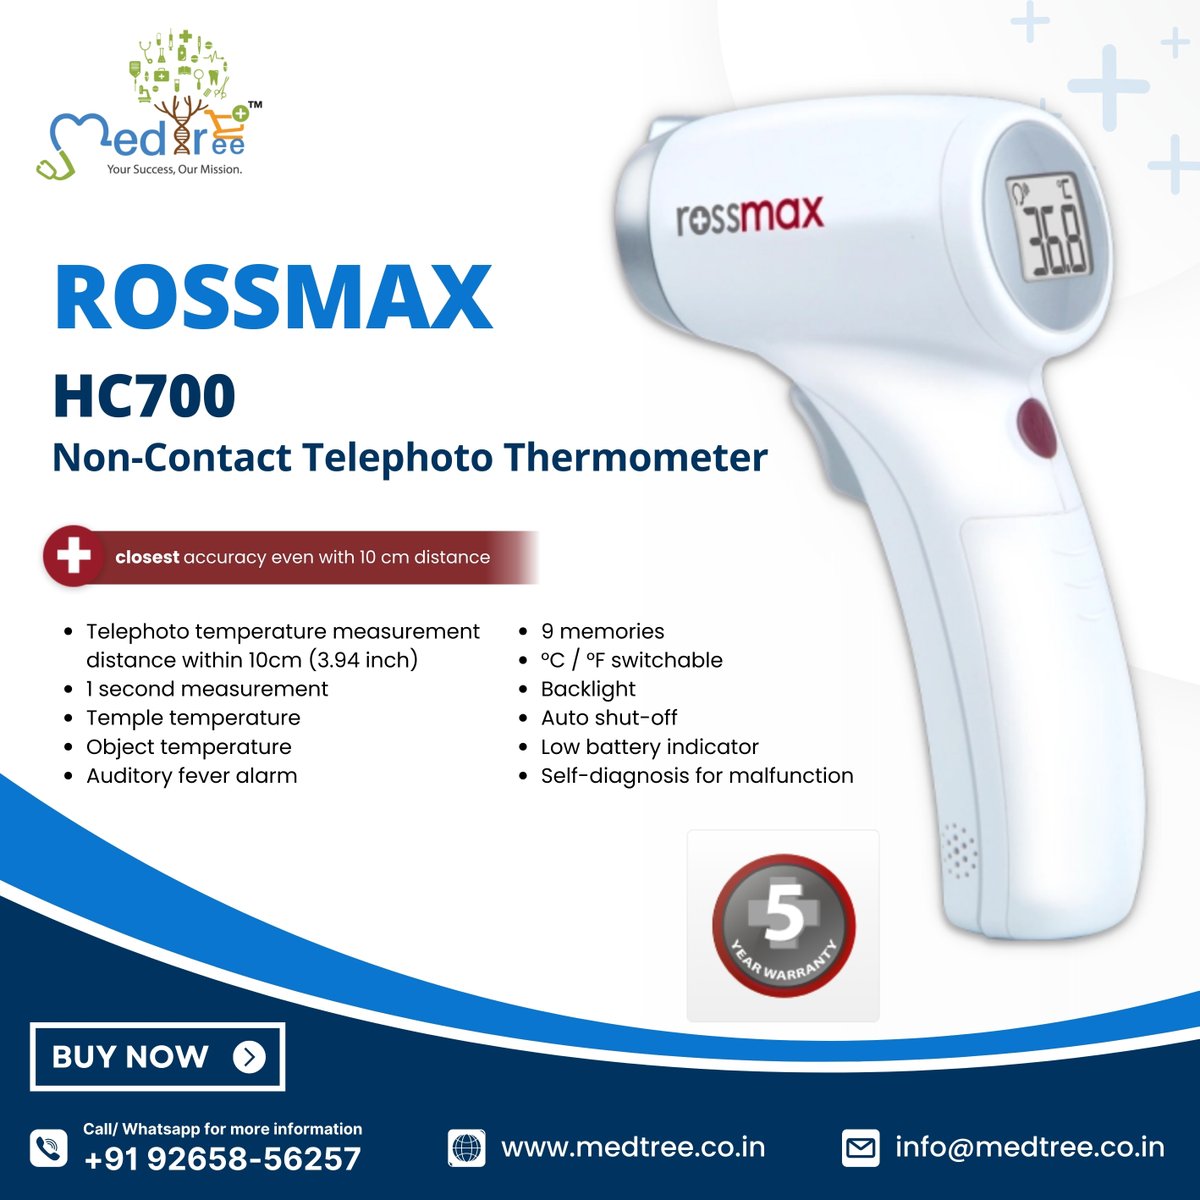 Rossmax HC700 Non-Contact Telephoto Thermometer
Buy Now: rfr.bz/t9yzd6h

#digitalthermometer #thermometer #checkhealthathome #temperature #medical #medicine #health #healthcare #doctors #medicalstudent #medicalproduct #medicine #physician #rossmax #medtree #medtreeindia